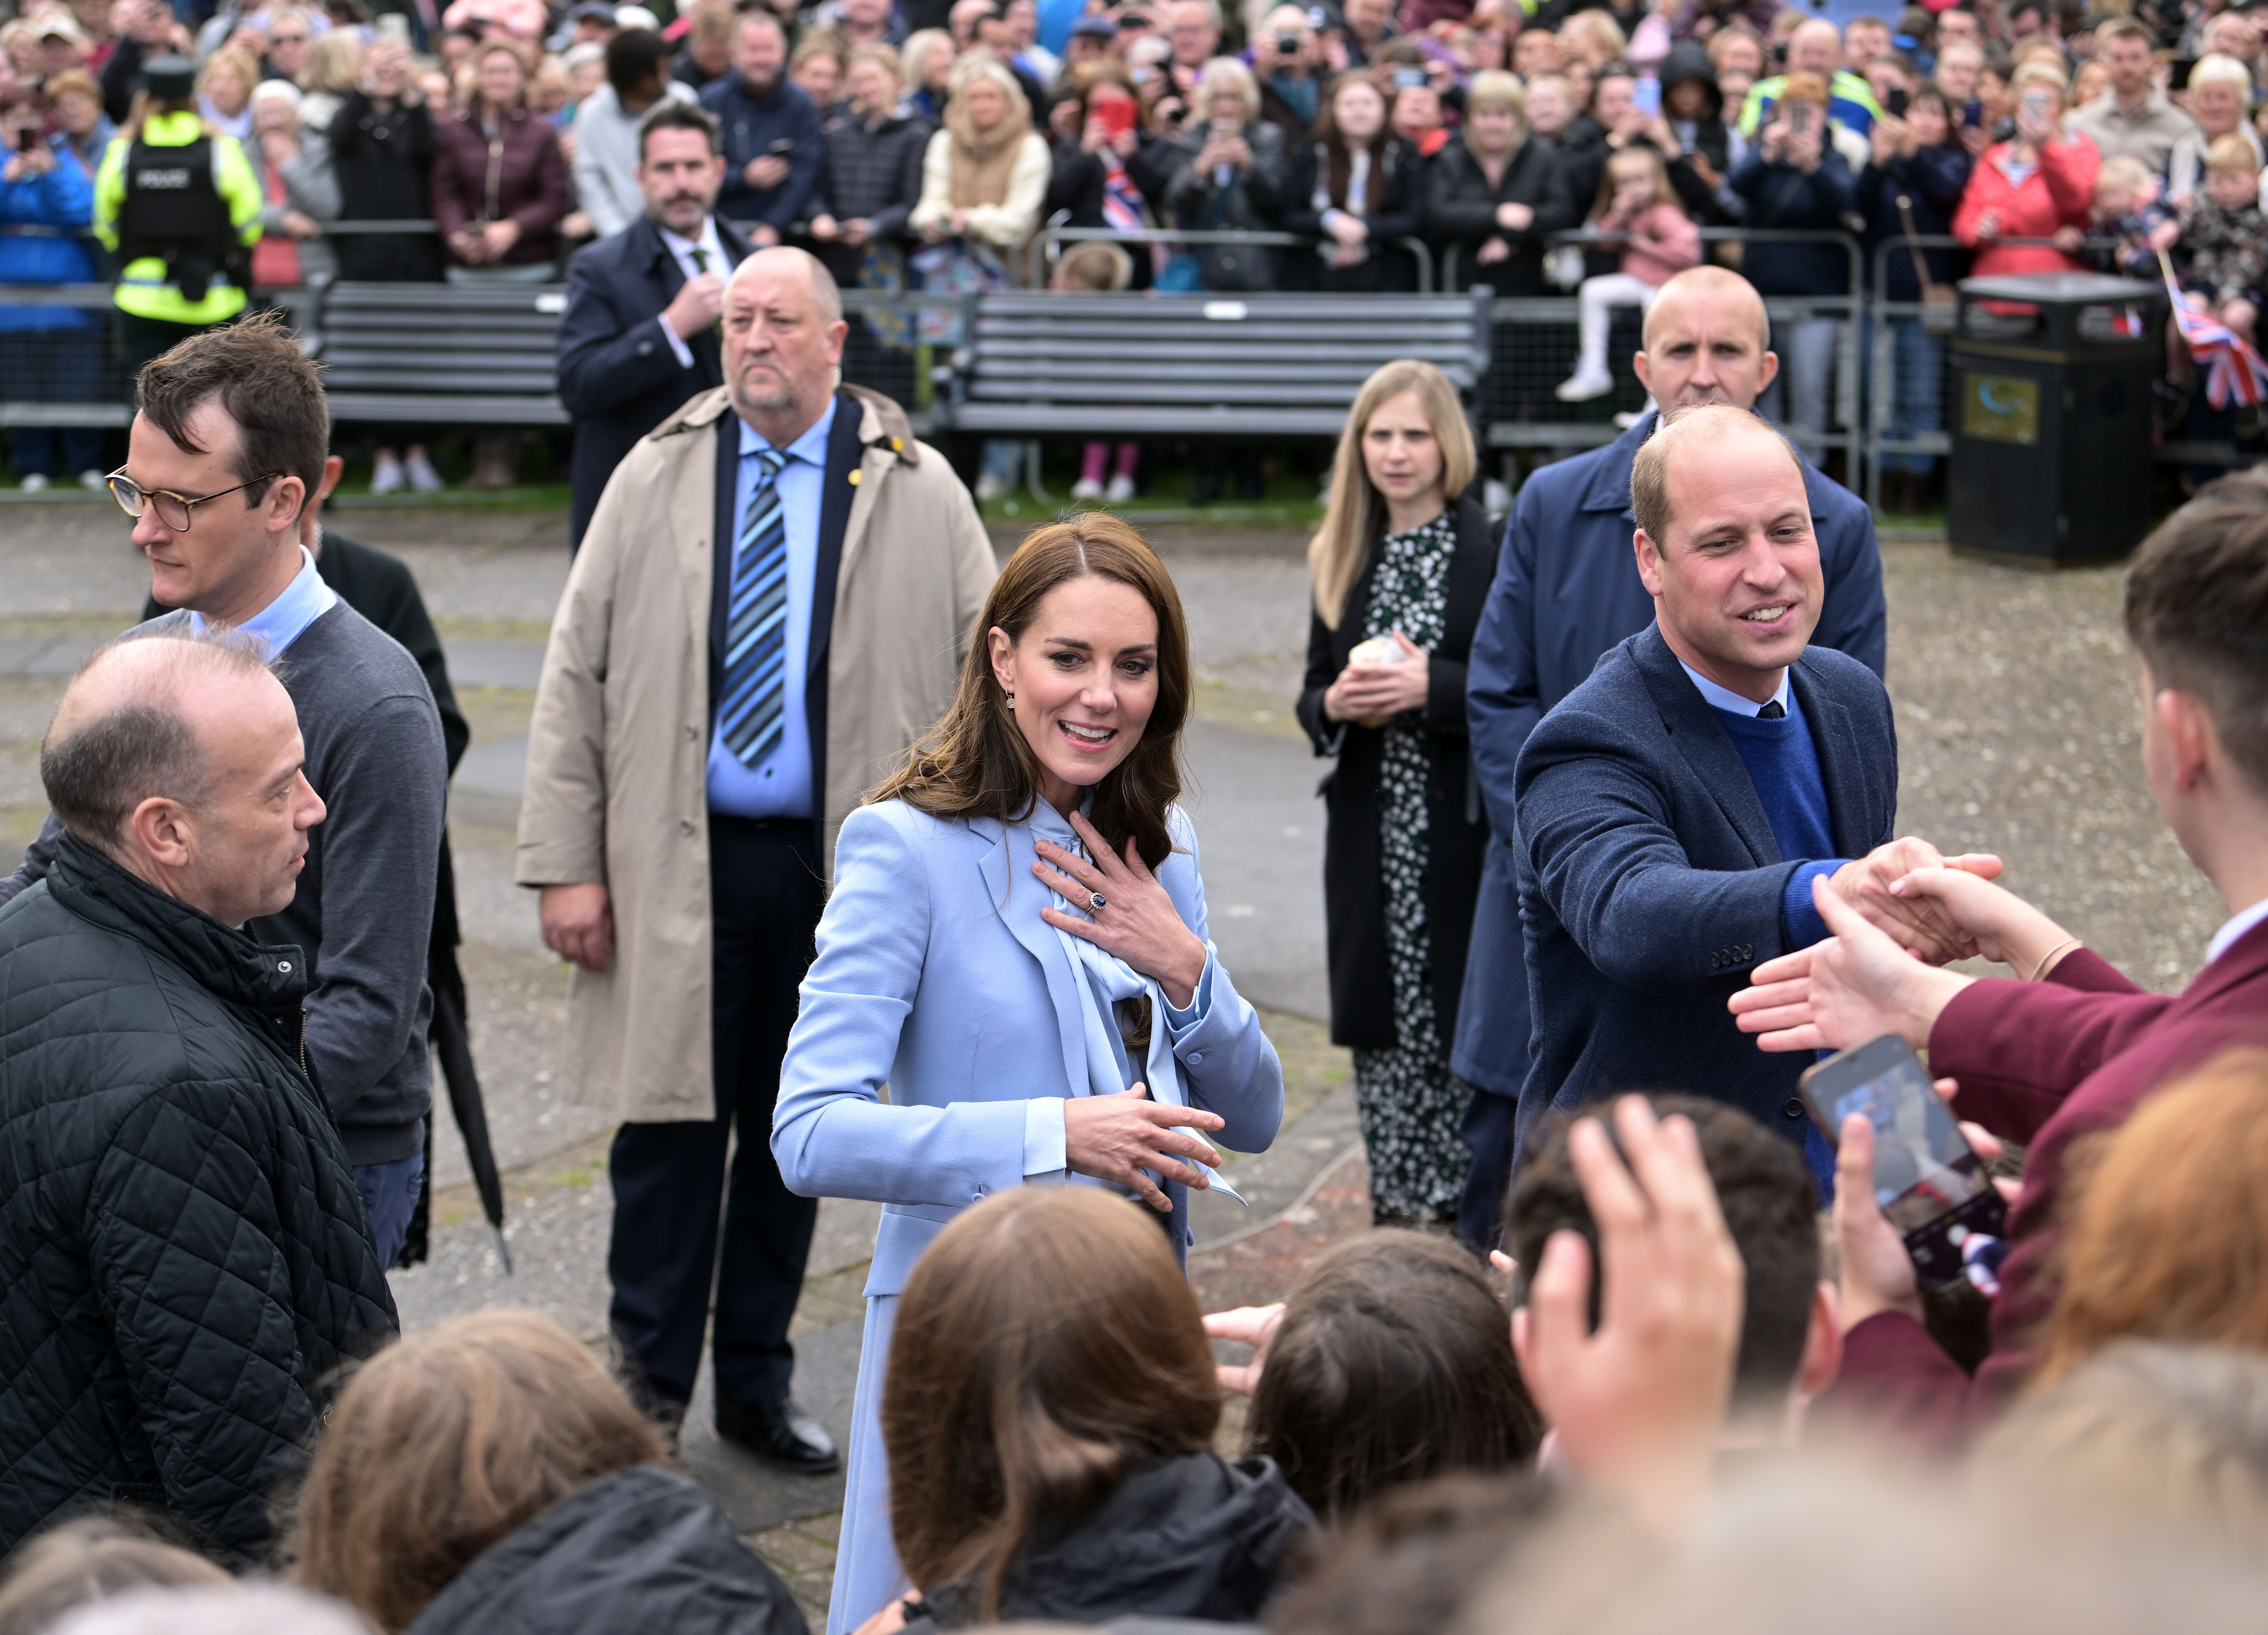 Catherine, Princess of Wales and Prince William, Prince of Wales greet the public during their visit to Carrickfergus Castle in Belfast, Northern Ireland, on October 6, 2022. | Source: Getty Images